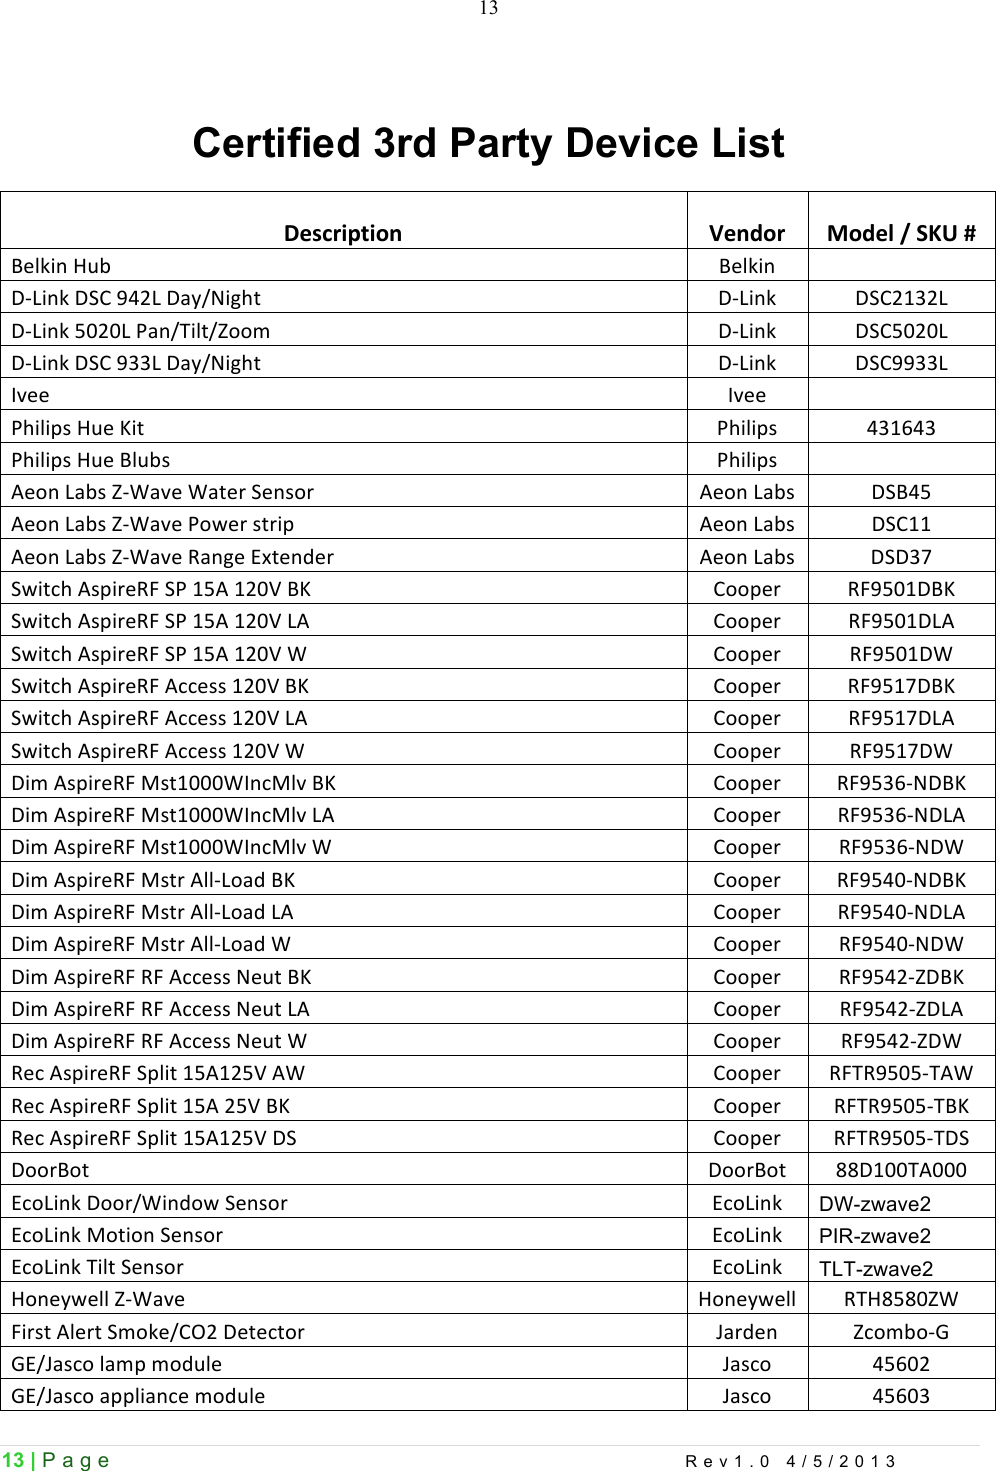  13 | Page    Rev1.0 4/5/2013  13  Certified 3rd Party Device List  Description+Vendor+Model+/+SKU+#+!&quot;#$%&amp;&apos;()*&apos;!&quot;#$%&amp;&apos;&apos;&apos;+,-%&amp;$&apos;+./&apos;012-&apos;+3456%789&apos;+,-%&amp;$&apos;+./2:;2-&apos;+,-%&amp;$&apos;&lt;=2=-&apos;&gt;3&amp;5?%#95@AAB&apos;+,-%&amp;$&apos;+./&lt;=2=-&apos;+,-%&amp;$&apos;+./&apos;0;;-&apos;+3456%789&apos;+,-%&amp;$&apos;+./00;;-&apos;CD&quot;&quot;&apos;CD&quot;&quot;&apos;&apos;&apos;&gt;8%#%EF&apos;()&quot;&apos;G%9&apos;&gt;8%#%EF&apos;1;:H1;&apos;&gt;8%#%EF&apos;()&quot;&apos;!#)*F&apos;&gt;8%#%EF&apos;&apos;&apos;I&quot;A&amp;&apos;-3*F&apos;@,J3D&quot;&apos;J39&quot;K&apos;.&quot;&amp;FAK&apos;I&quot;A&amp;&apos;-3*F&apos;+.!1&lt;&apos;I&quot;A&amp;&apos;-3*F&apos;@,J3D&quot;&apos;&gt;AL&quot;K&apos;F9K%E&apos;I&quot;A&amp;&apos;-3*F&apos;+./::&apos;I&quot;A&amp;&apos;-3*F&apos;@,J3D&quot;&apos;M3&amp;7&quot;&apos;NO9&quot;&amp;P&quot;K&apos;I&quot;A&amp;&apos;-3*F&apos;+.+;Q&apos;.L%9R8&apos;IFE%K&quot;MS&apos;.&gt;&apos;:&lt;I&apos;:2=T&apos;!G&apos;/AAE&quot;K&apos;MS0&lt;=:+!G&apos;.L%9R8&apos;IFE%K&quot;MS&apos;.&gt;&apos;:&lt;I&apos;:2=T&apos;-I&apos;/AAE&quot;K&apos;MS0&lt;=:+-I&apos;.L%9R8&apos;IFE%K&quot;MS&apos;.&gt;&apos;:&lt;I&apos;:2=T&apos;J&apos;/AAE&quot;K&apos;MS0&lt;=:+J&apos;.L%9R8&apos;IFE%K&quot;MS&apos;IRR&quot;FF&apos;:2=T&apos;!G&apos;/AAE&quot;K&apos;MS0&lt;:Q+!G&apos;.L%9R8&apos;IFE%K&quot;MS&apos;IRR&quot;FF&apos;:2=T&apos;-I&apos;/AAE&quot;K&apos;MS0&lt;:Q+-I&apos;.L%9R8&apos;IFE%K&quot;MS&apos;IRR&quot;FF&apos;:2=T&apos;J&apos;/AAE&quot;K&apos;MS0&lt;:Q+J&apos;+%B&apos;IFE%K&quot;MS&apos;UF9:===JC&amp;RU#D&apos;!G&apos;/AAE&quot;K&apos;MS0&lt;;H,6+!G&apos;+%B&apos;IFE%K&quot;MS&apos;UF9:===JC&amp;RU#D&apos;-I&apos;/AAE&quot;K&apos;MS0&lt;;H,6+-I&apos;+%B&apos;IFE%K&quot;MS&apos;UF9:===JC&amp;RU#D&apos;J&apos;/AAE&quot;K&apos;MS0&lt;;H,6+J&apos;+%B&apos;IFE%K&quot;MS&apos;UF9K&apos;I##,-A3P&apos;!G&apos;/AAE&quot;K&apos;MS0&lt;1=,6+!G&apos;+%B&apos;IFE%K&quot;MS&apos;UF9K&apos;I##,-A3P&apos;-I&apos;/AAE&quot;K&apos;MS0&lt;1=,6+-I&apos;+%B&apos;IFE%K&quot;MS&apos;UF9K&apos;I##,-A3P&apos;J&apos;/AAE&quot;K&apos;MS0&lt;1=,6+J&apos;+%B&apos;IFE%K&quot;MS&apos;MS&apos;IRR&quot;FF&apos;6&quot;)9&apos;!G&apos;/AAE&quot;K&apos;MS0&lt;12,@+!G&apos;+%B&apos;IFE%K&quot;MS&apos;MS&apos;IRR&quot;FF&apos;6&quot;)9&apos;-I&apos;/AAE&quot;K&apos;MS0&lt;12,@+-I&apos;+%B&apos;IFE%K&quot;MS&apos;MS&apos;IRR&quot;FF&apos;6&quot;)9&apos;J&apos;/AAE&quot;K&apos;MS0&lt;12,@+J&apos;M&quot;R&apos;IFE%K&quot;MS&apos;.E#%9&apos;:&lt;I:2&lt;T&apos;IJ&apos;/AAE&quot;K&apos;MS?M0&lt;=&lt;,?IJ&apos;M&quot;R&apos;IFE%K&quot;MS&apos;.E#%9&apos;:&lt;I&apos;2&lt;T&apos;!G&apos;/AAE&quot;K&apos;MS?M0&lt;=&lt;,?!G&apos;M&quot;R&apos;IFE%K&quot;MS&apos;.E#%9&apos;:&lt;I:2&lt;T&apos;+.&apos;/AAE&quot;K&apos;MS?M0&lt;=&lt;,?+.&apos;+AAK!A9&apos;+AAK!A9&apos;VV+:==?I===&apos;NRA-%&amp;$&apos;+AAK5J%&amp;PAL&apos;.&quot;&amp;FAK&apos;NRA-%&amp;$&apos;DW-zwave2 NRA-%&amp;$&apos;UA9%A&amp;&apos;.&quot;&amp;FAK&apos;NRA-%&amp;$&apos;PIR-zwave2 NRA-%&amp;$&apos;?%#9&apos;.&quot;&amp;FAK&apos;NRA-%&amp;$&apos;TLT-zwave2 (A&amp;&quot;4L&quot;##&apos;@,J3D&quot;&apos;&apos;(A&amp;&quot;4L&quot;##&apos;M?(V&lt;V=@J&apos;S%KF9&apos;I#&quot;K9&apos;.BA$&quot;5/W2&apos;+&quot;9&quot;R9AK&apos;X3KP&quot;&amp;&apos;@RAB*A,Y&apos;YN5X3FRA&apos;#3BE&apos;BAP)#&quot;&apos;X3FRA&apos;1&lt;H=2&apos;YN5X3FRA&apos;3EE#%3&amp;R&quot;&apos;BAP)#&quot;&apos;X3FRA&apos;1&lt;H=;&apos;